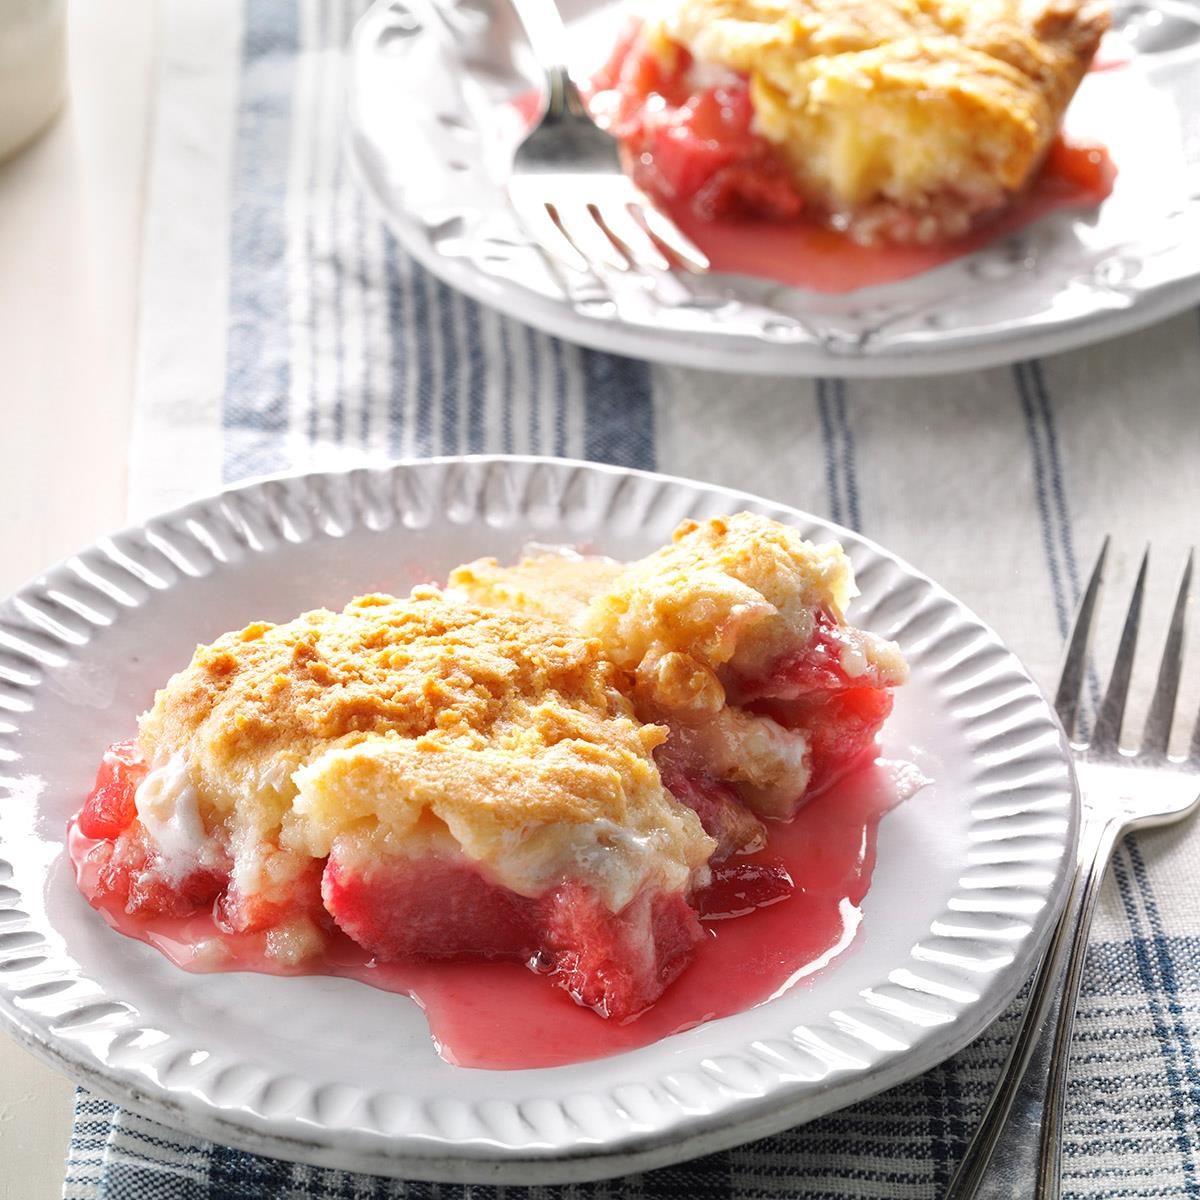 Rhubarb Mallow Cobbler Recipe: How to Make It